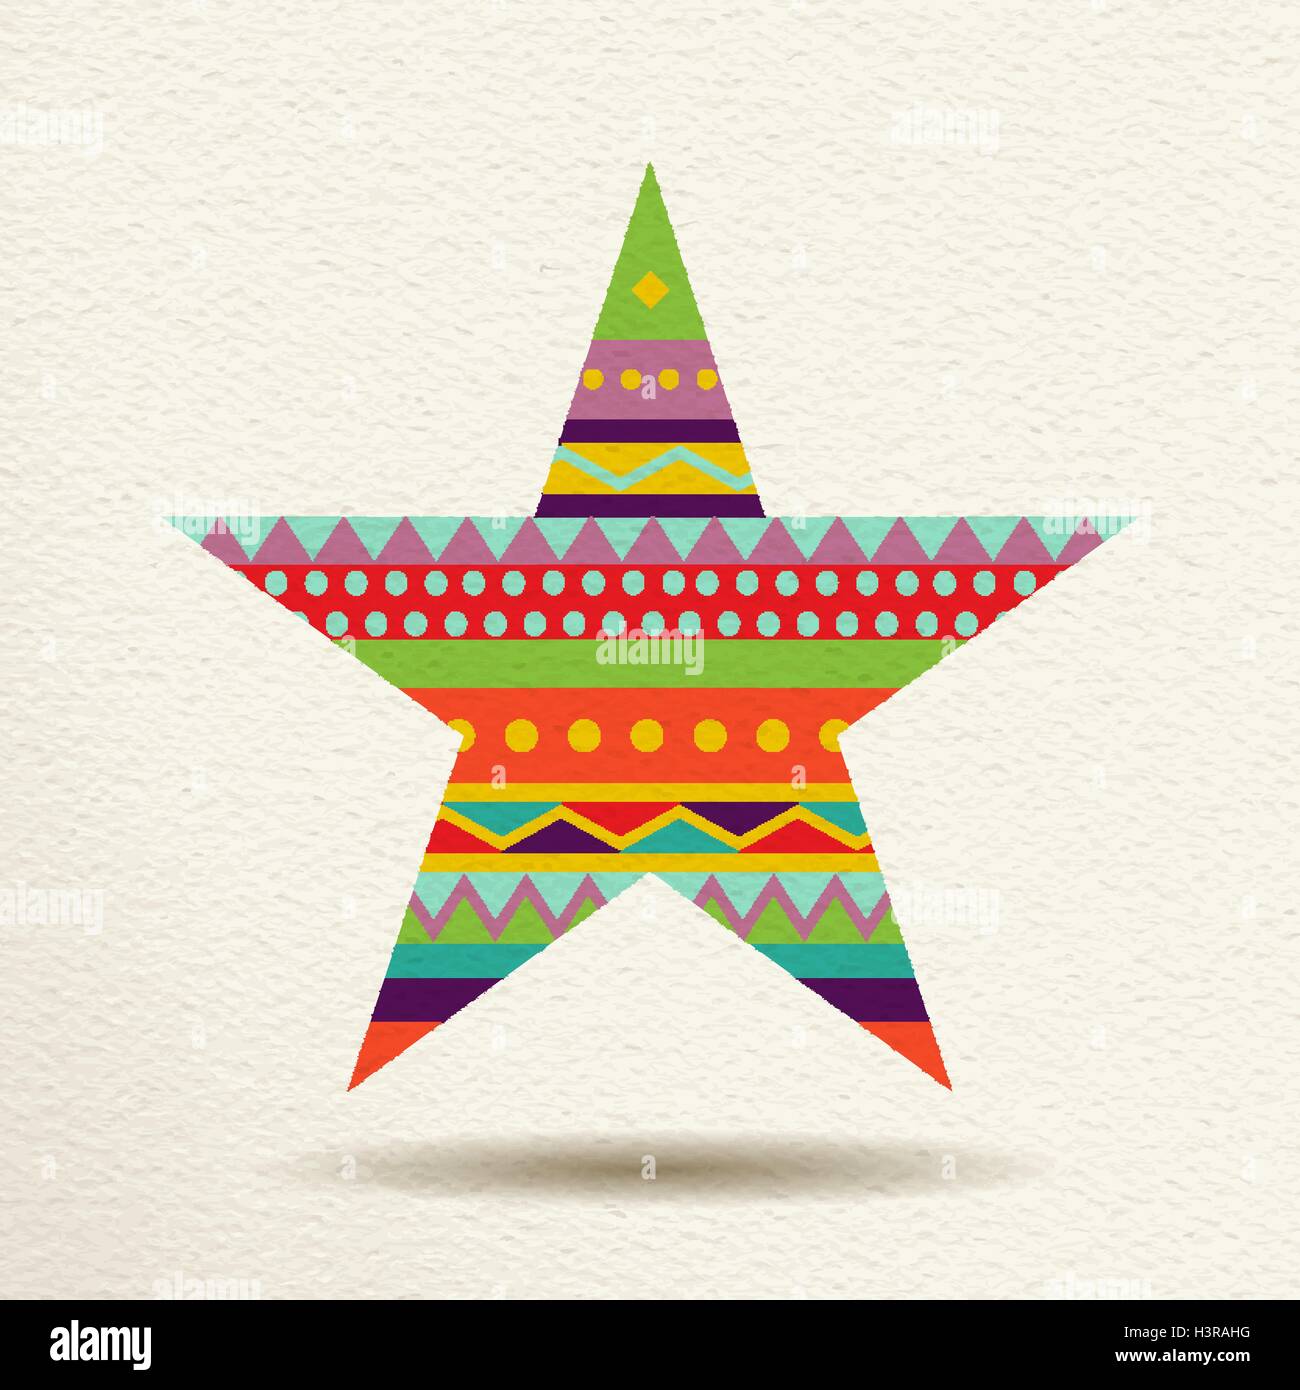 Star decoration in fun happy colors with abstract geometric shapes, concept design. EPS10 vector. Stock Vector